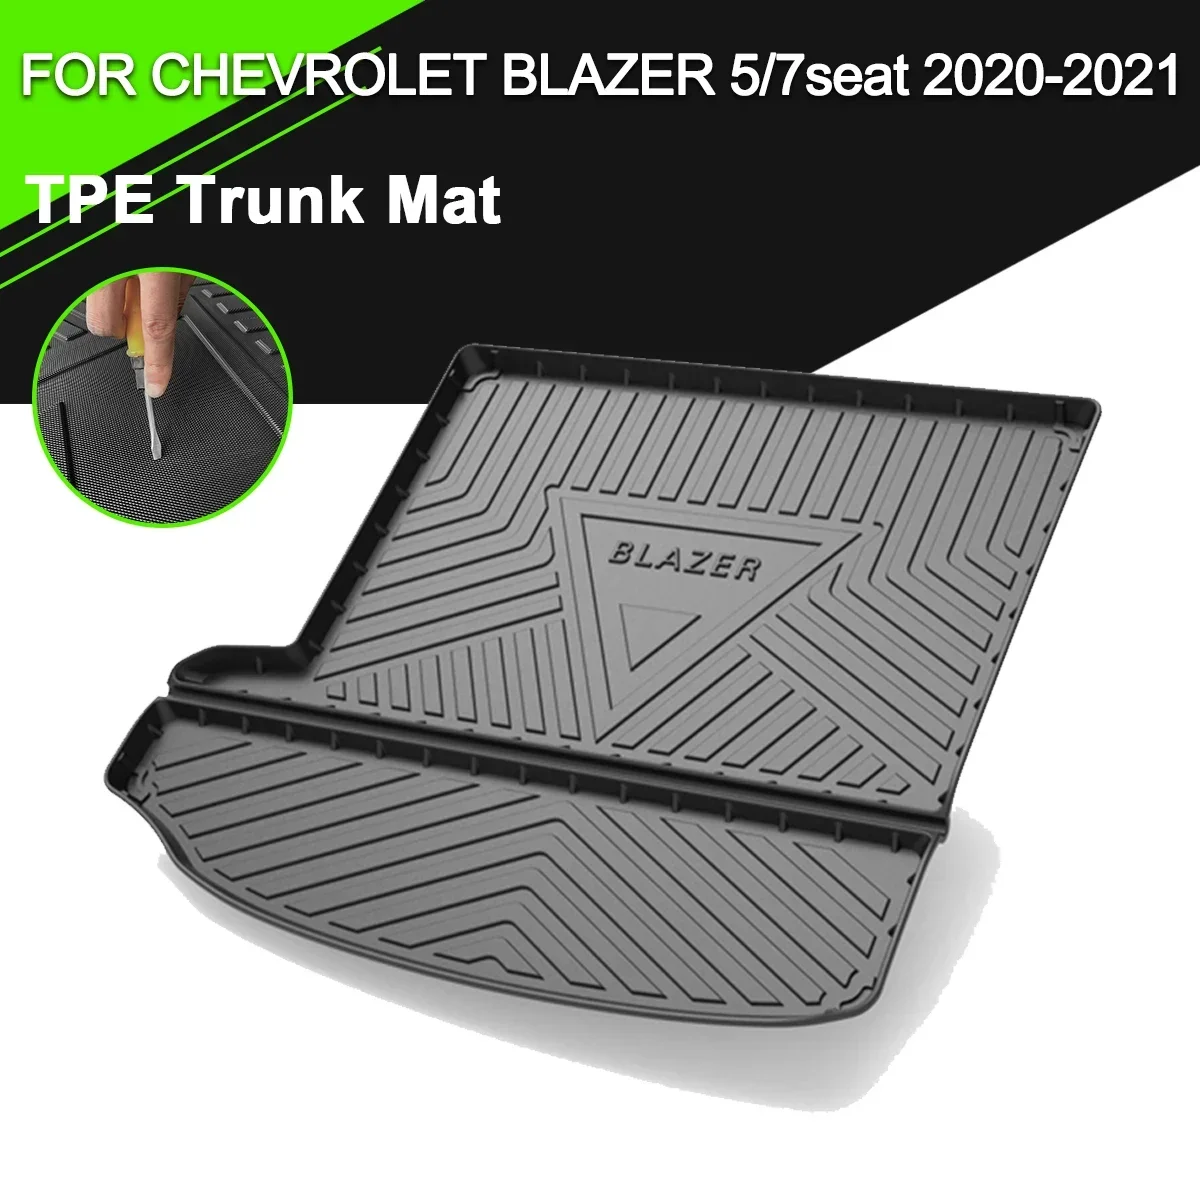 

Car Rear Trunk Cover Mat TPE Waterproof Non-Slip Rubber Cargo Liner Accessories For Chevrolet Blazer 5/7 Seater 2020-2021